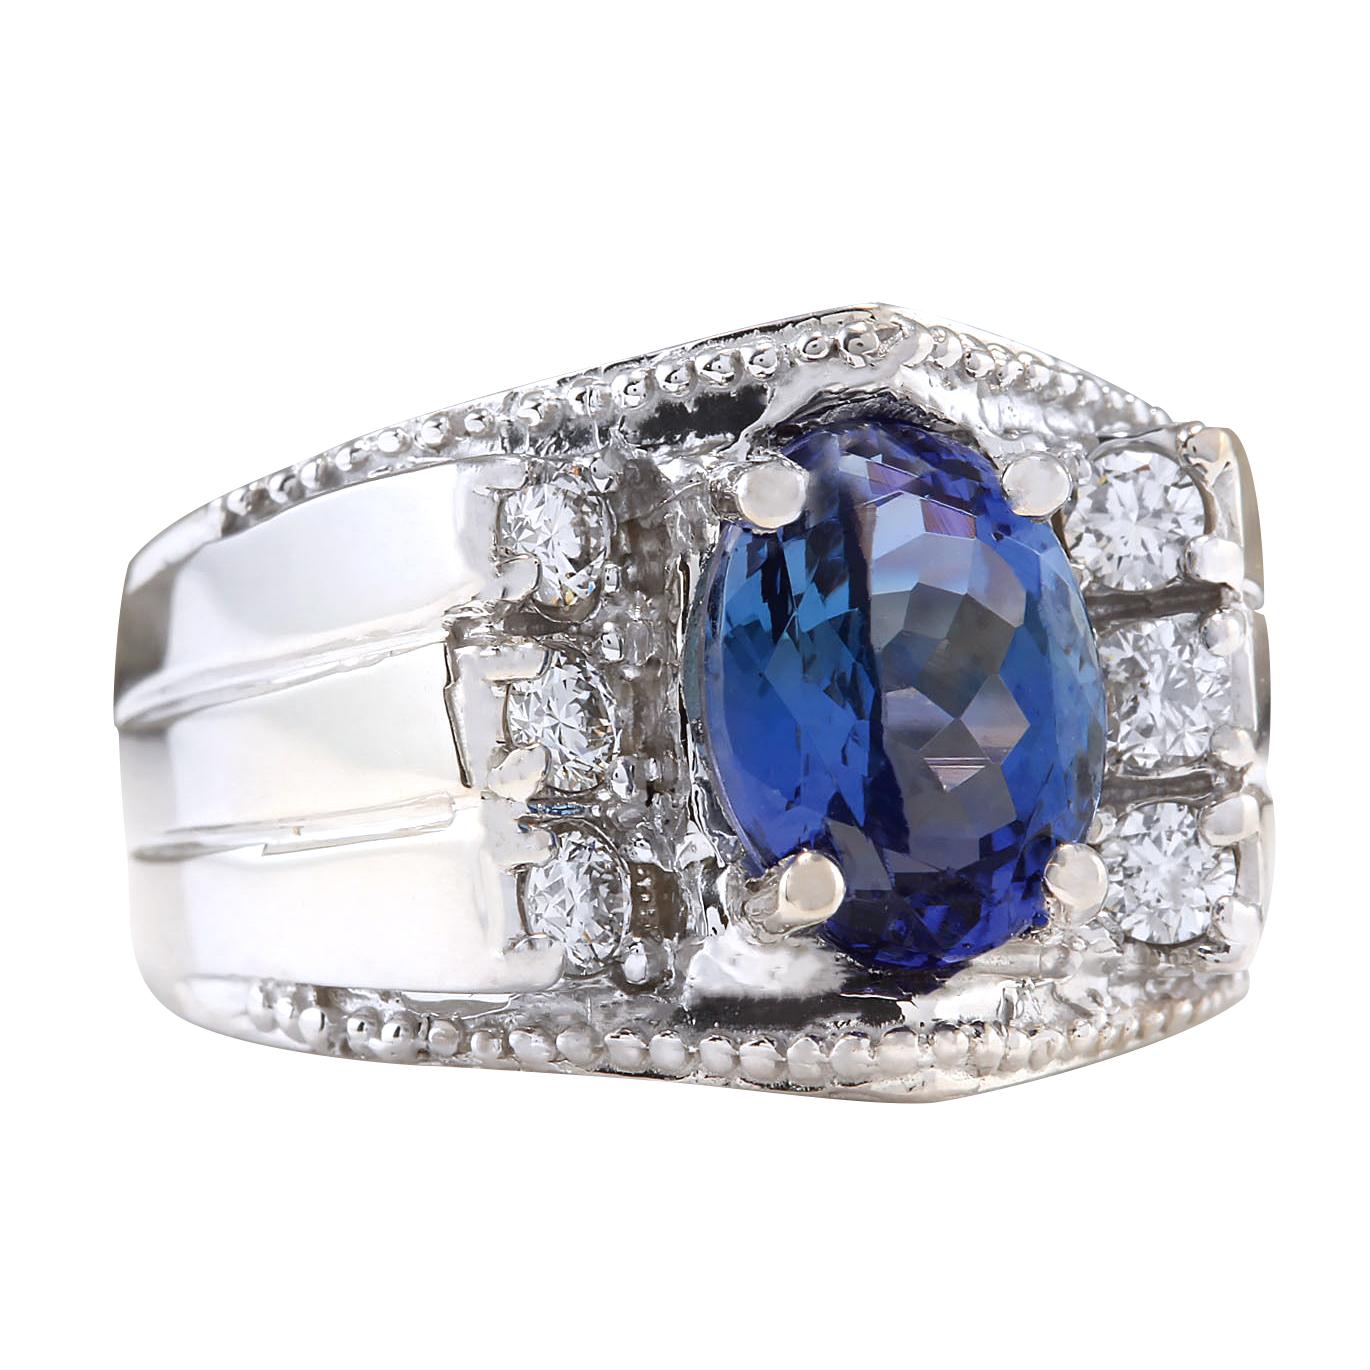 Introducing our distinguished Man's 4.62 Carat Natural Tanzanite 14 Karat White Gold Diamond Ring, a symbol of refinement and sophistication. Crafted from luxurious 14K white gold and stamped for authenticity, this ring exudes elegance and style. At